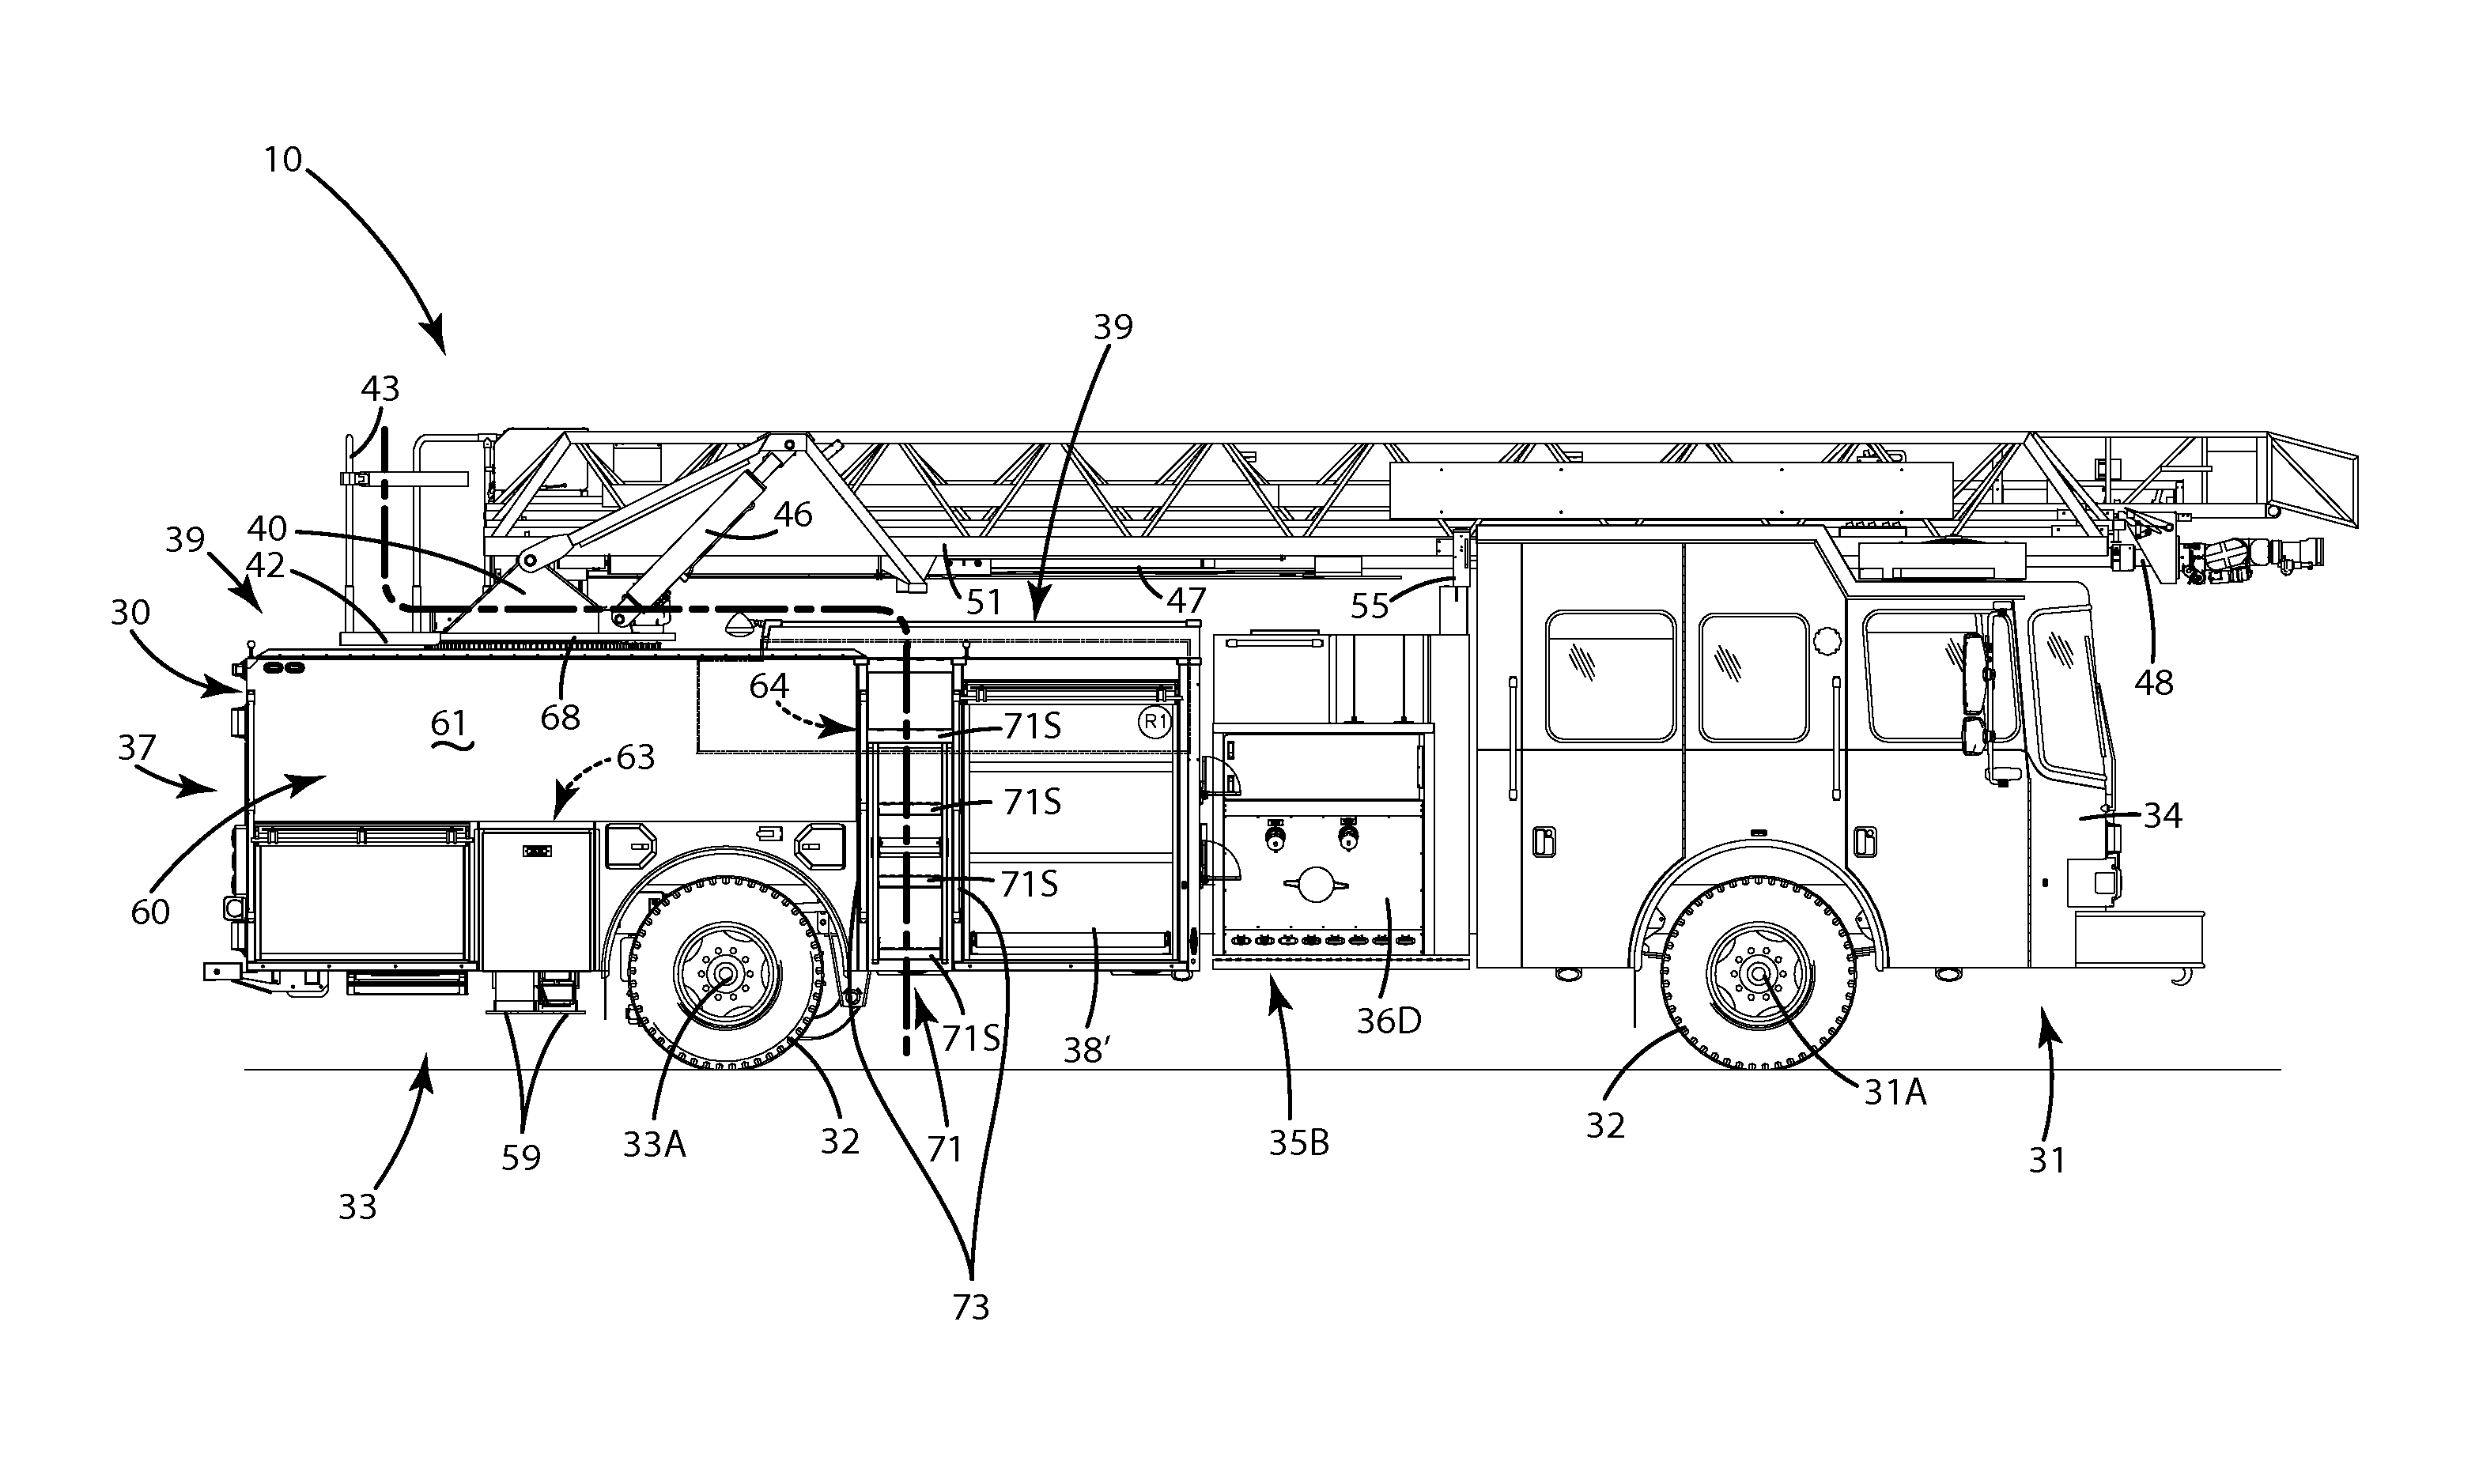 Firefighting or rescue apparatus including side access ladder